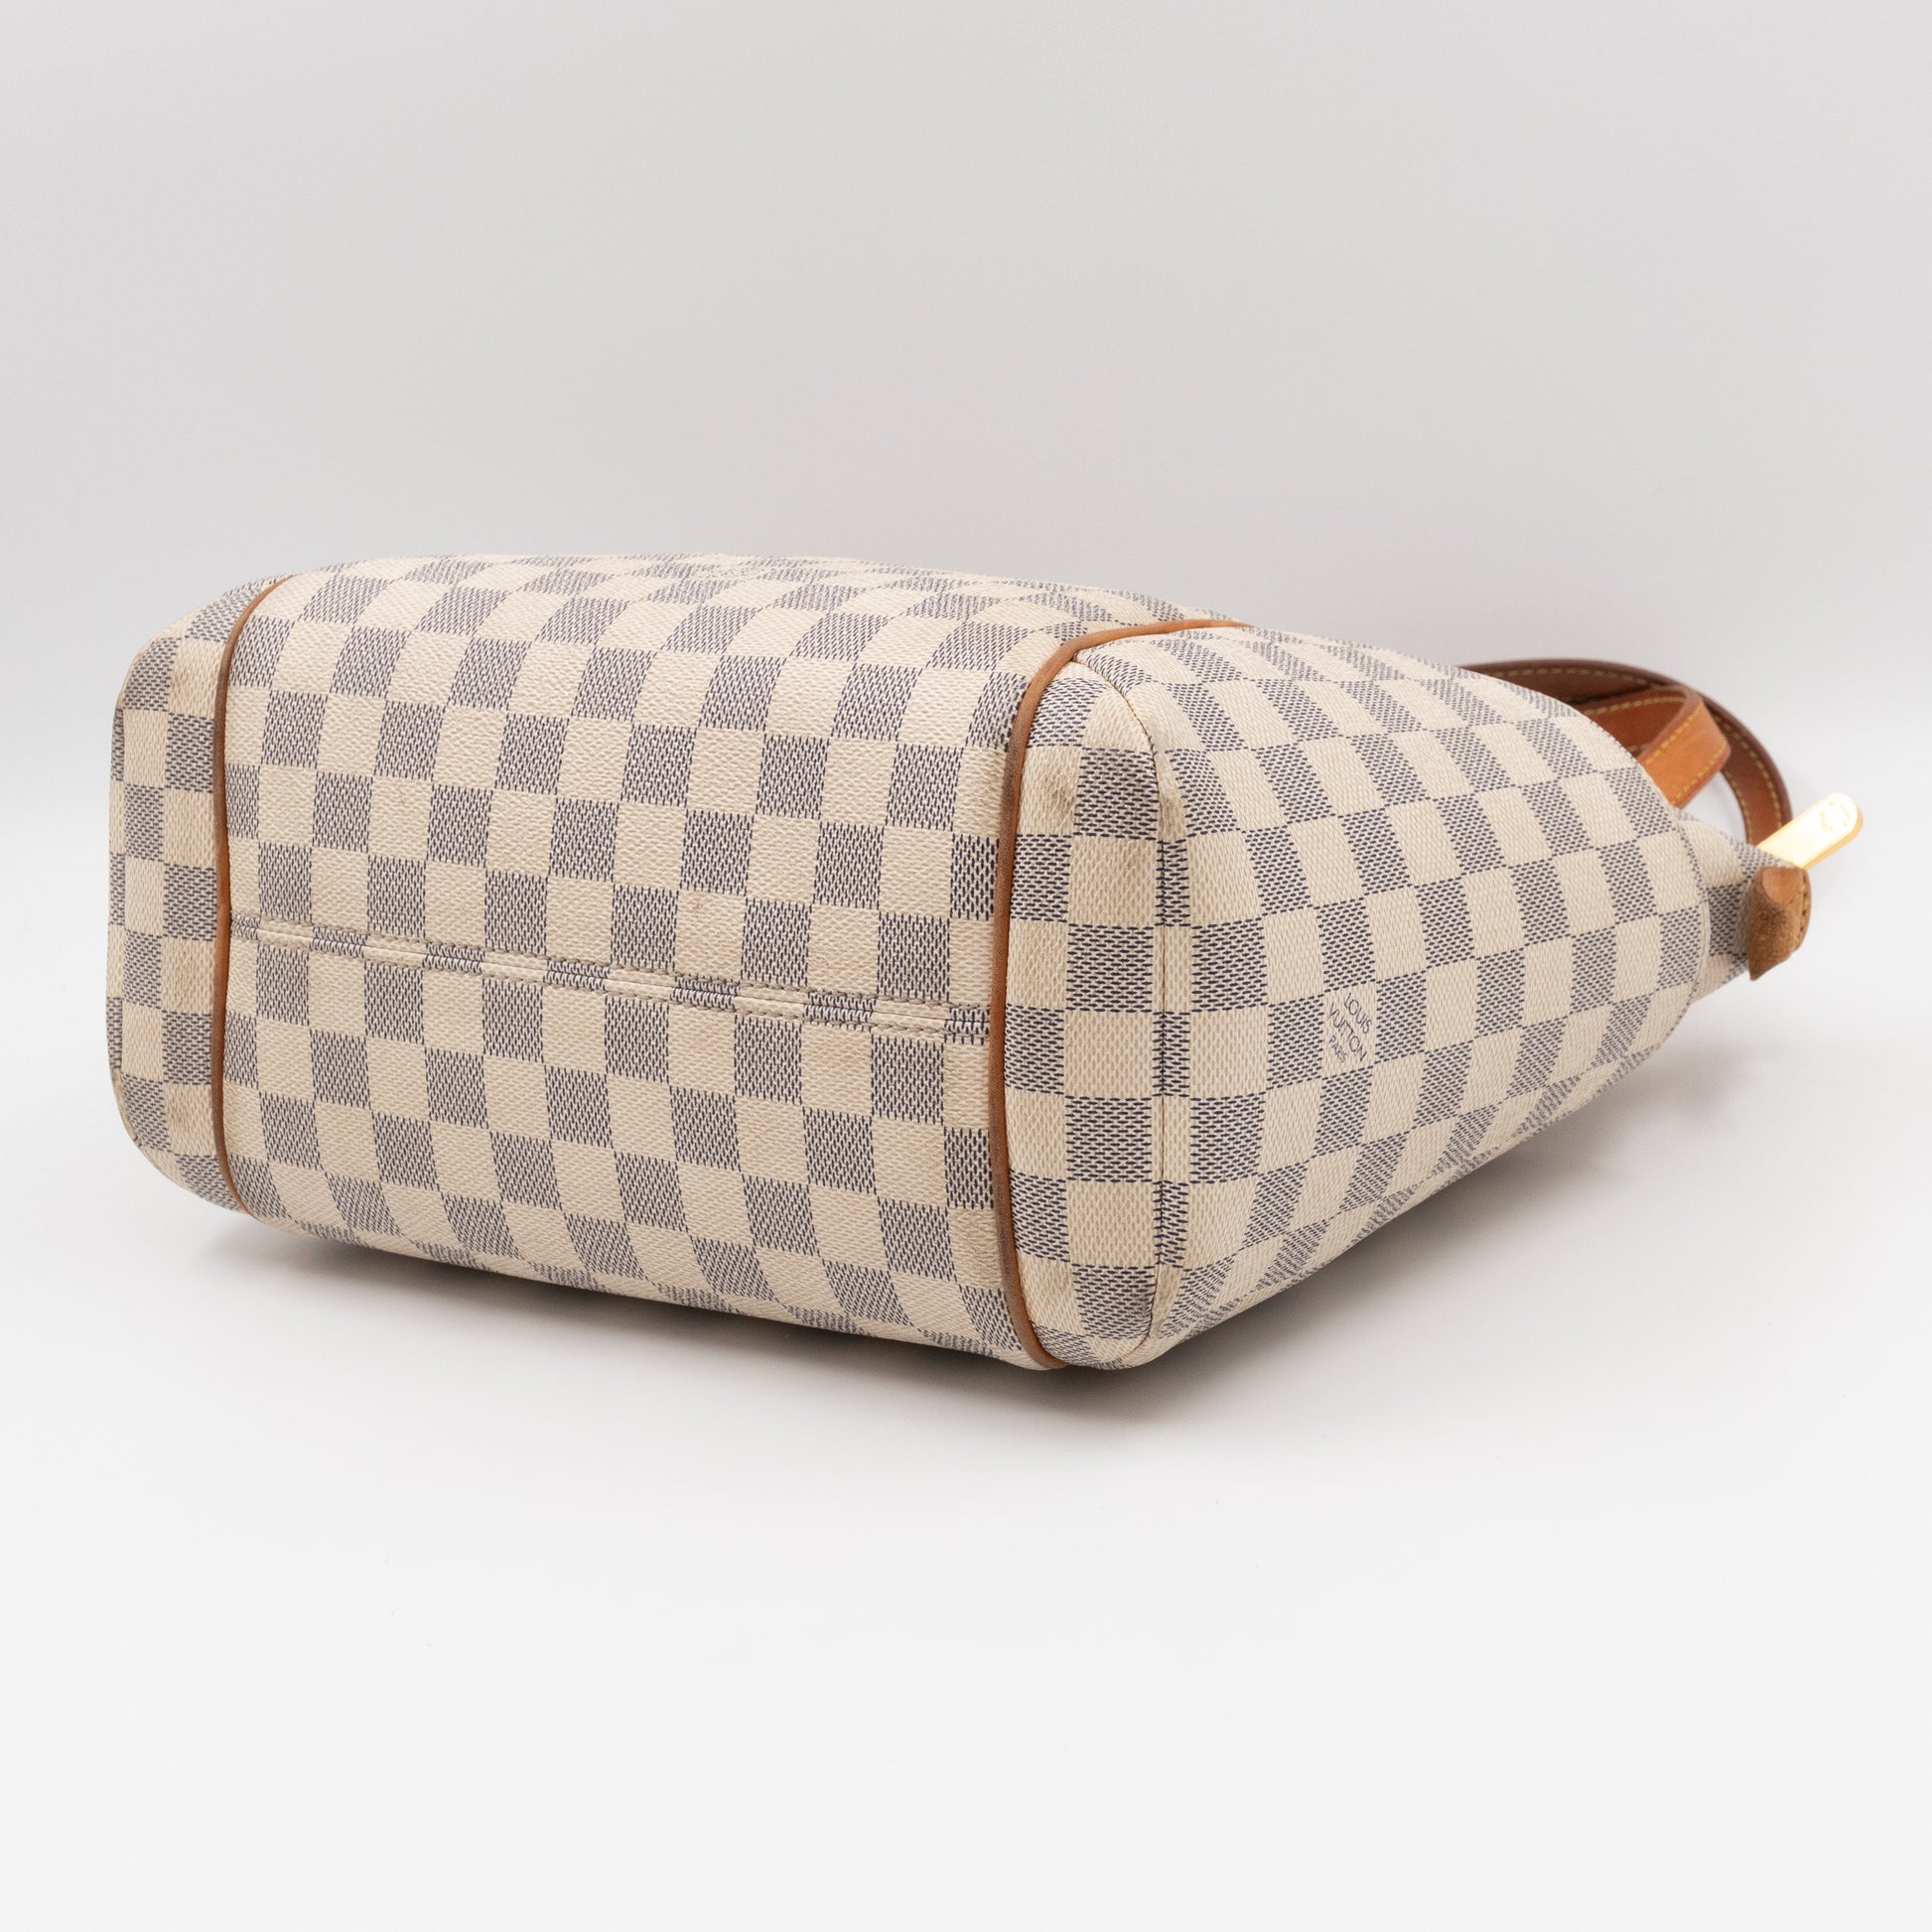 Louis Vuitton Totally PM in Damier Azur Coated Canvas in Good 